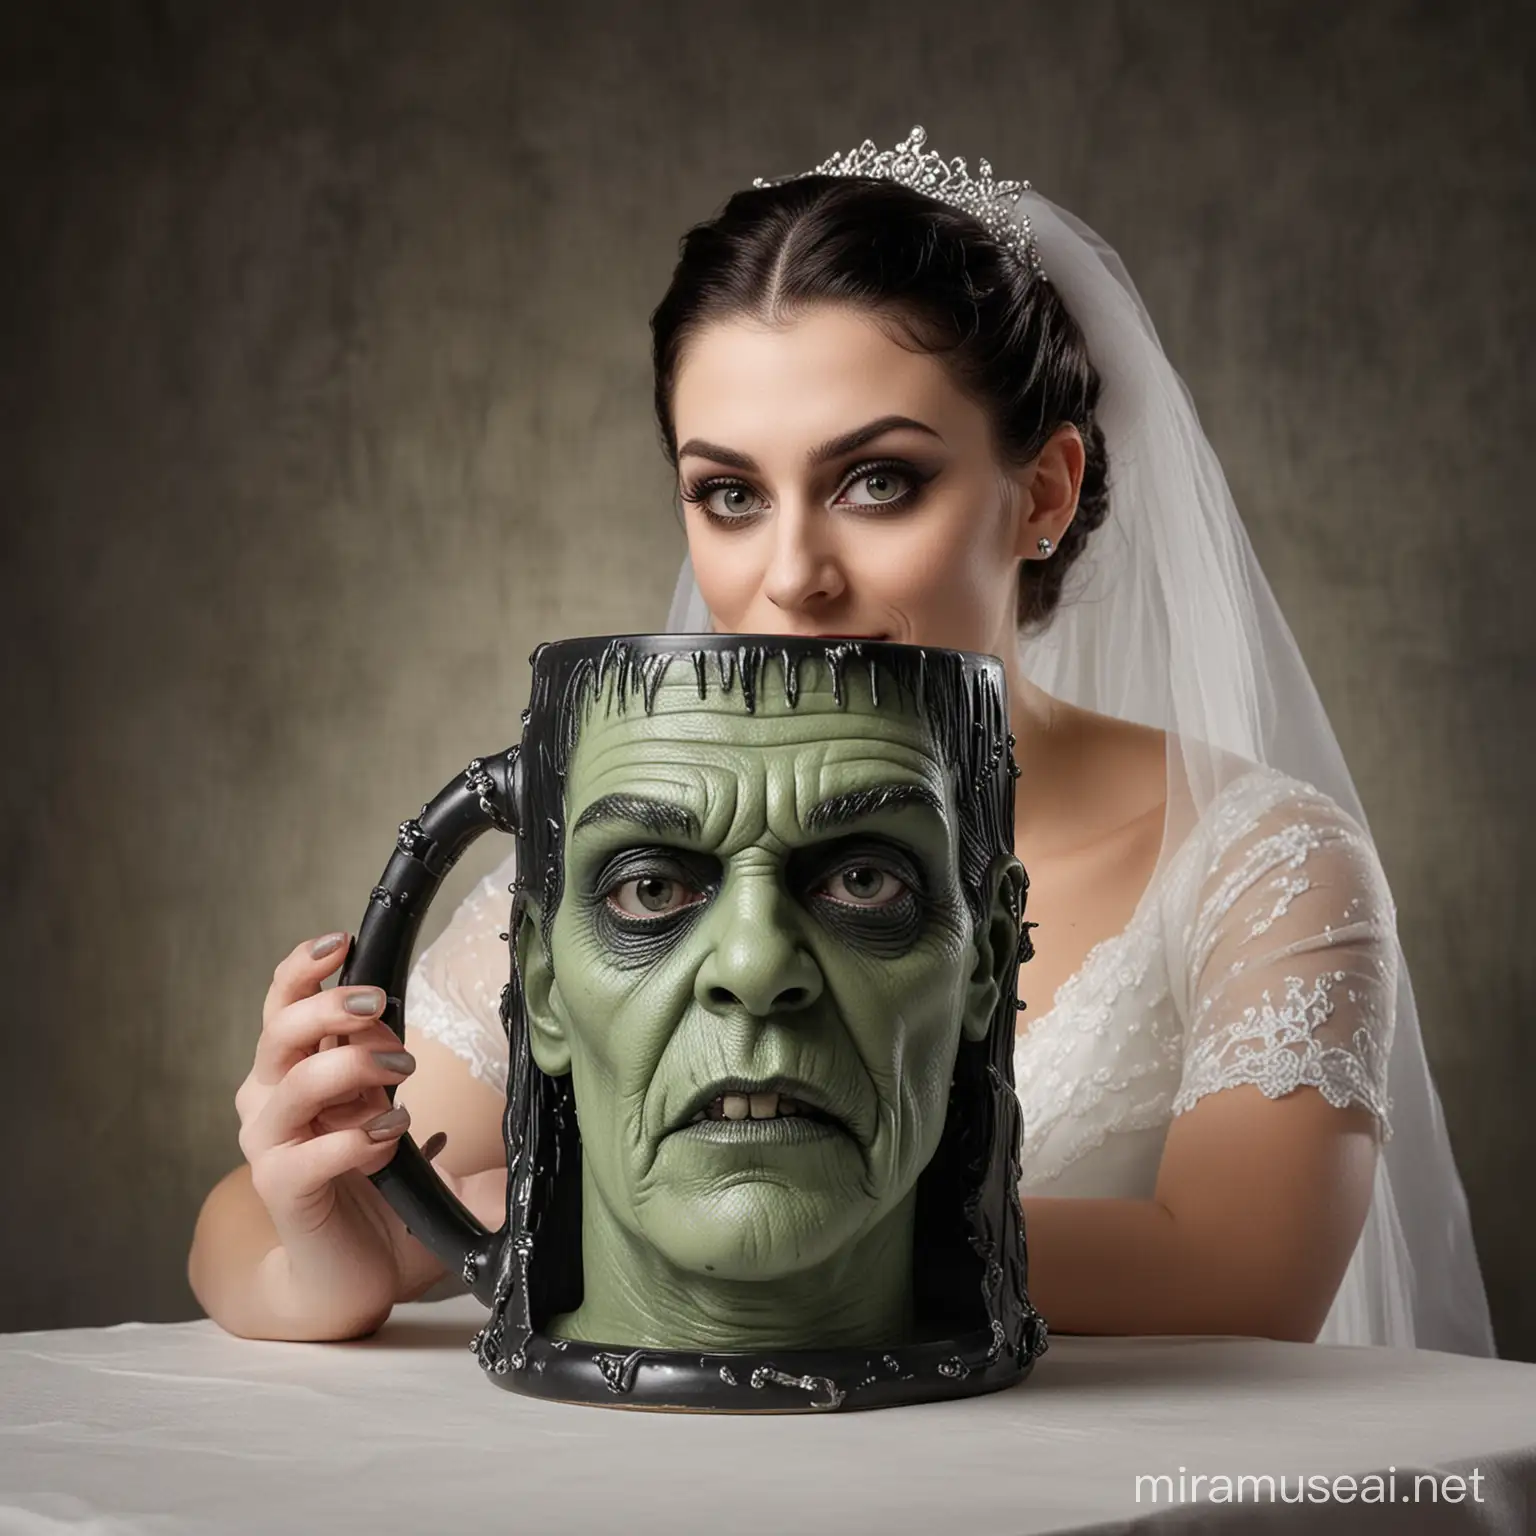 A realistic image of a stein mug in the shape of Frankenstein's head being held by a sexy 19 year old Bride of Frankenstein. Gothic lab setting.